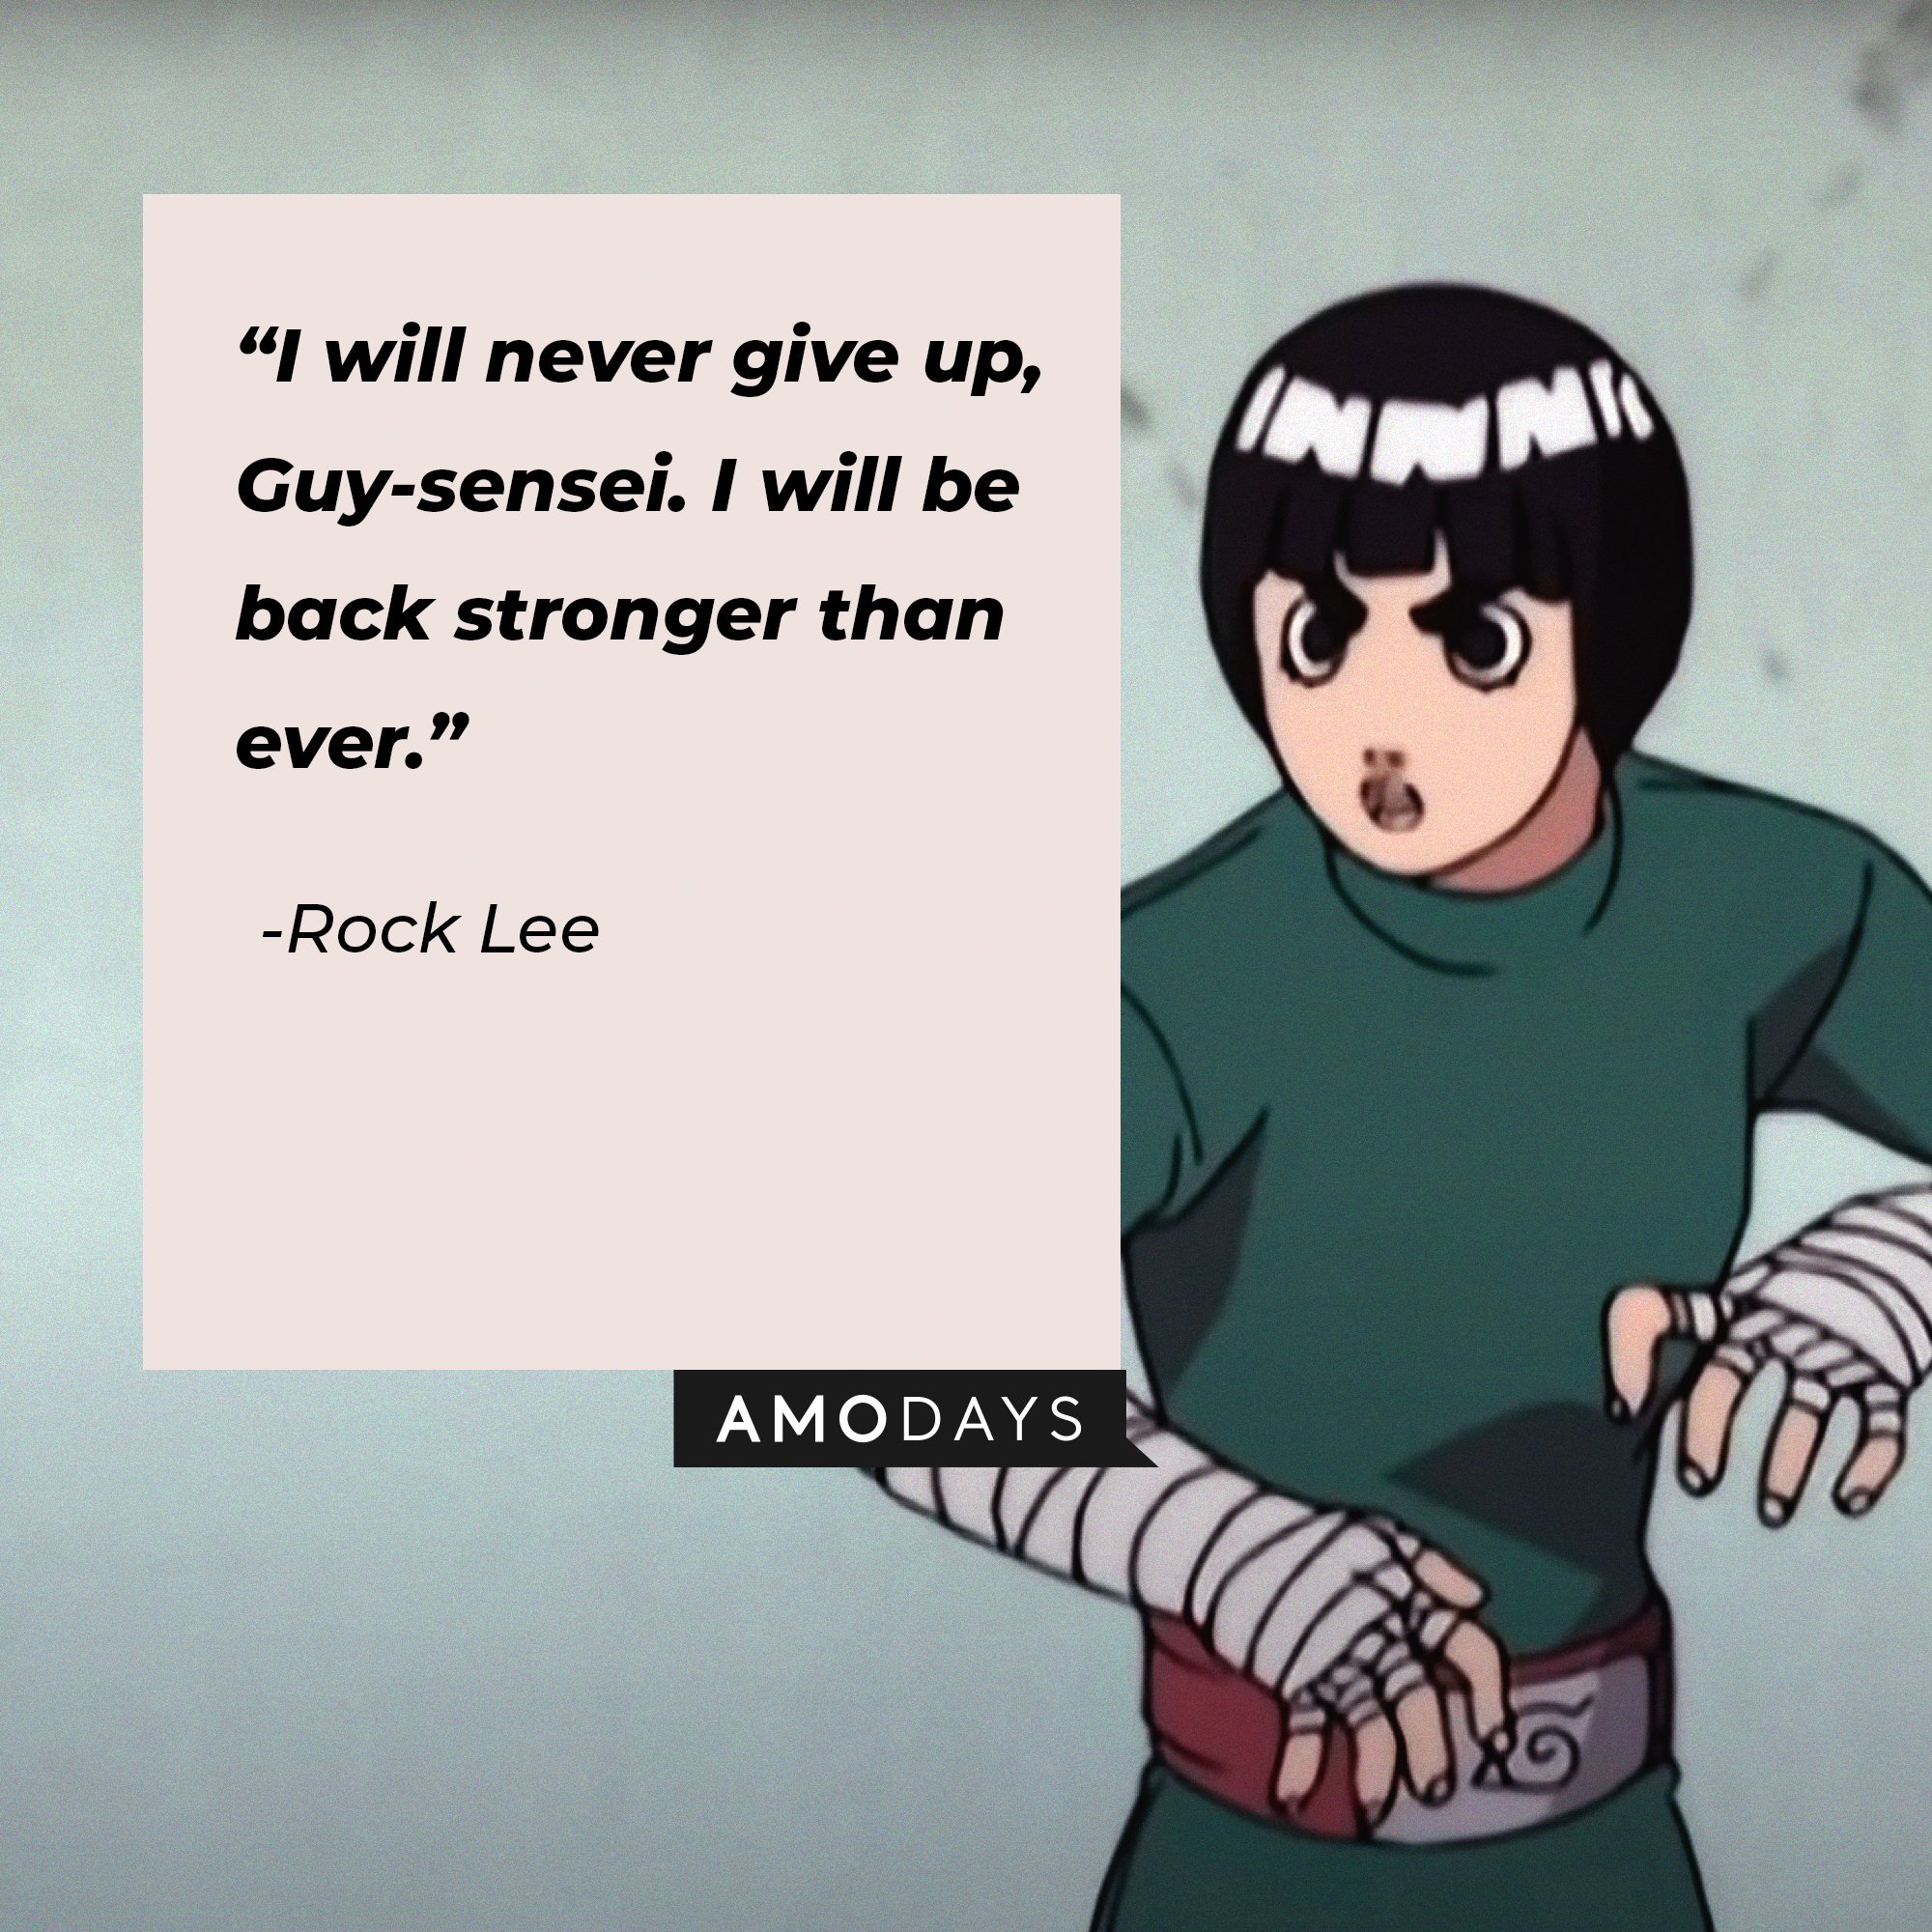 Rock Lee’s quote: "I will never give up, Guy-sensei. I will be back stronger than ever."  | Image: AmoDays